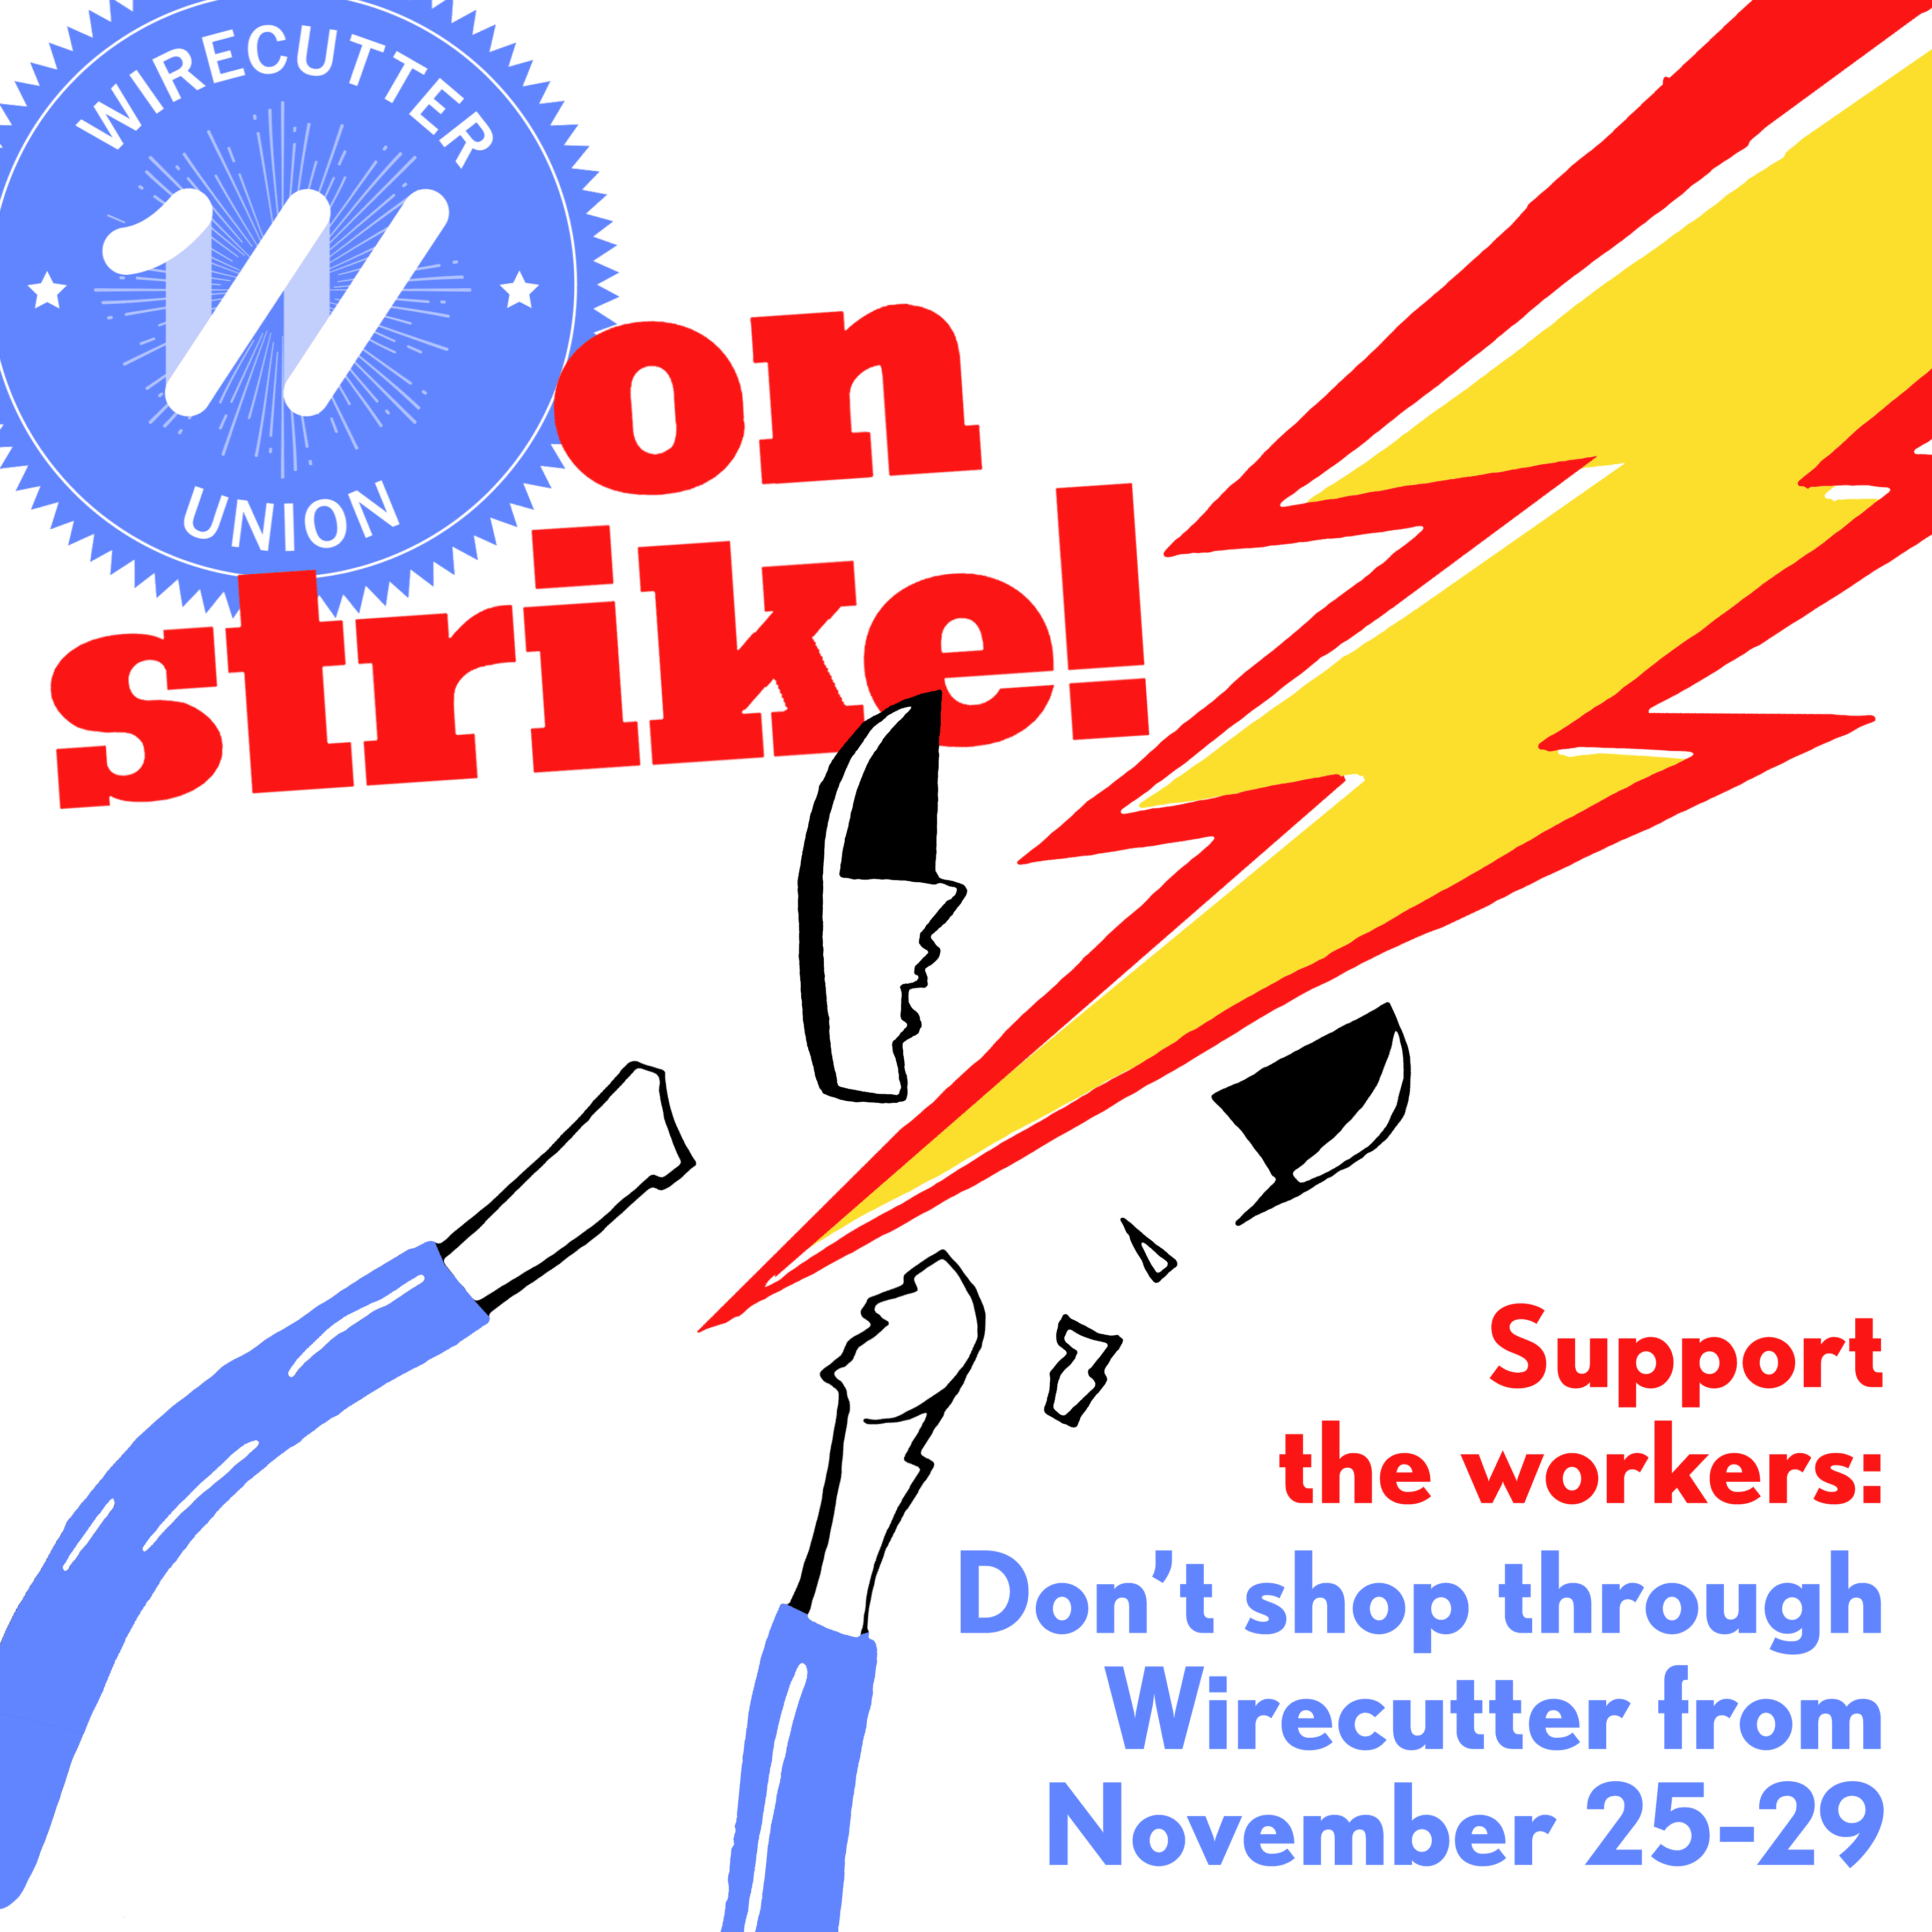 An image with the Wirecutter Union logo in the upper left corner, the words "on strike!," a pair of wirecutters being split by a lightning bolt, and the text "Support the workers: Don't shop through Wirecutter from November 25-29"